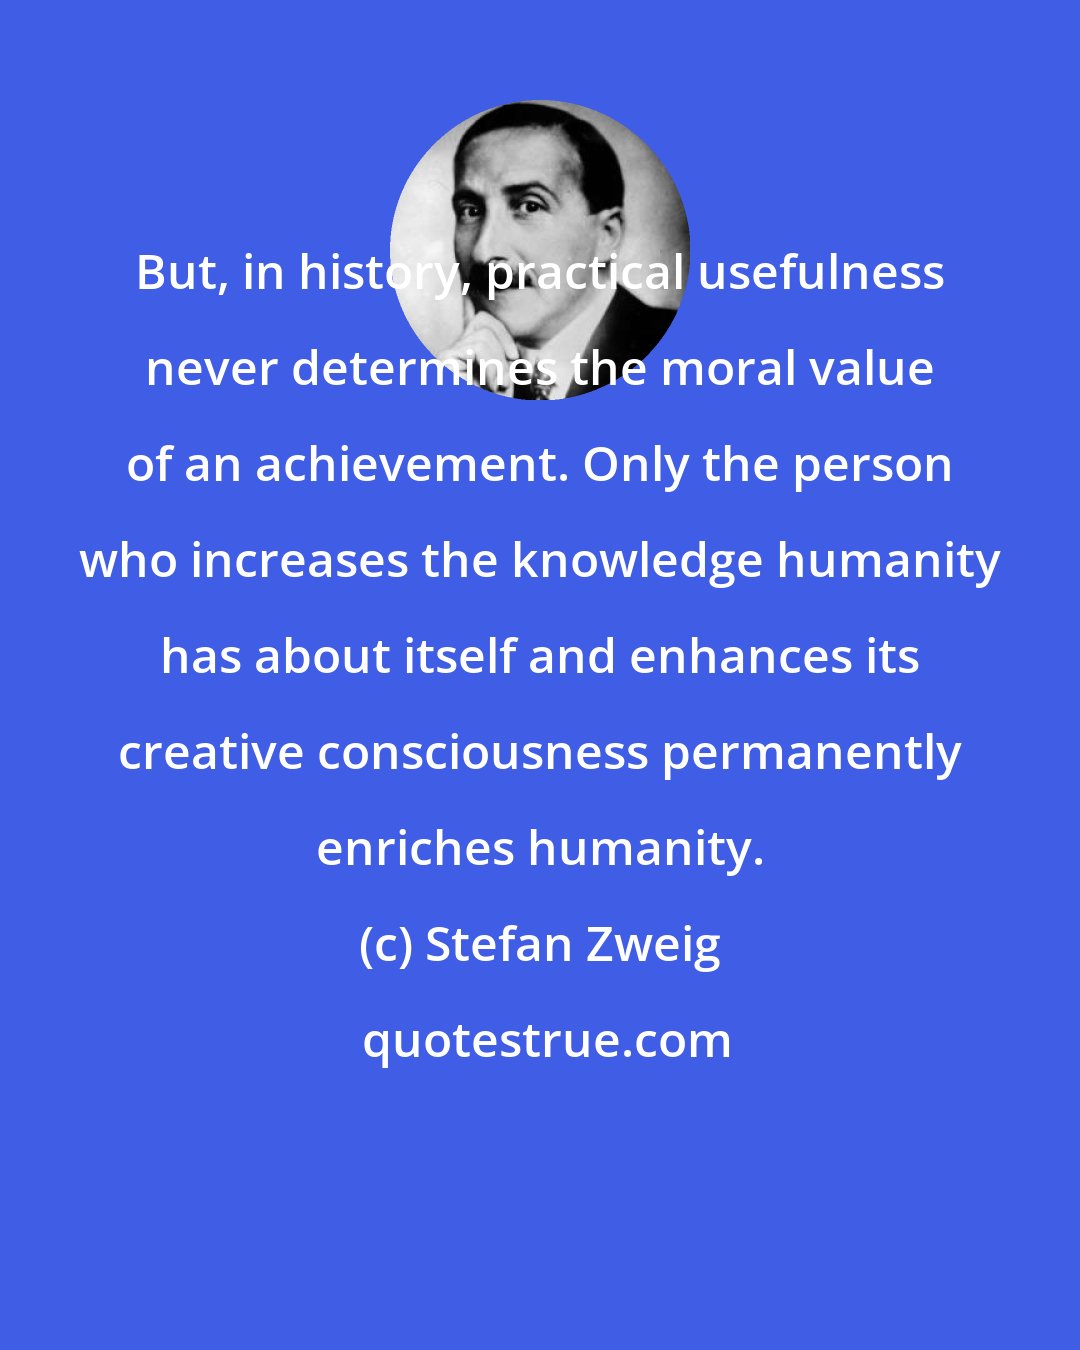 Stefan Zweig: But, in history, practical usefulness never determines the moral value of an achievement. Only the person who increases the knowledge humanity has about itself and enhances its creative consciousness permanently enriches humanity.